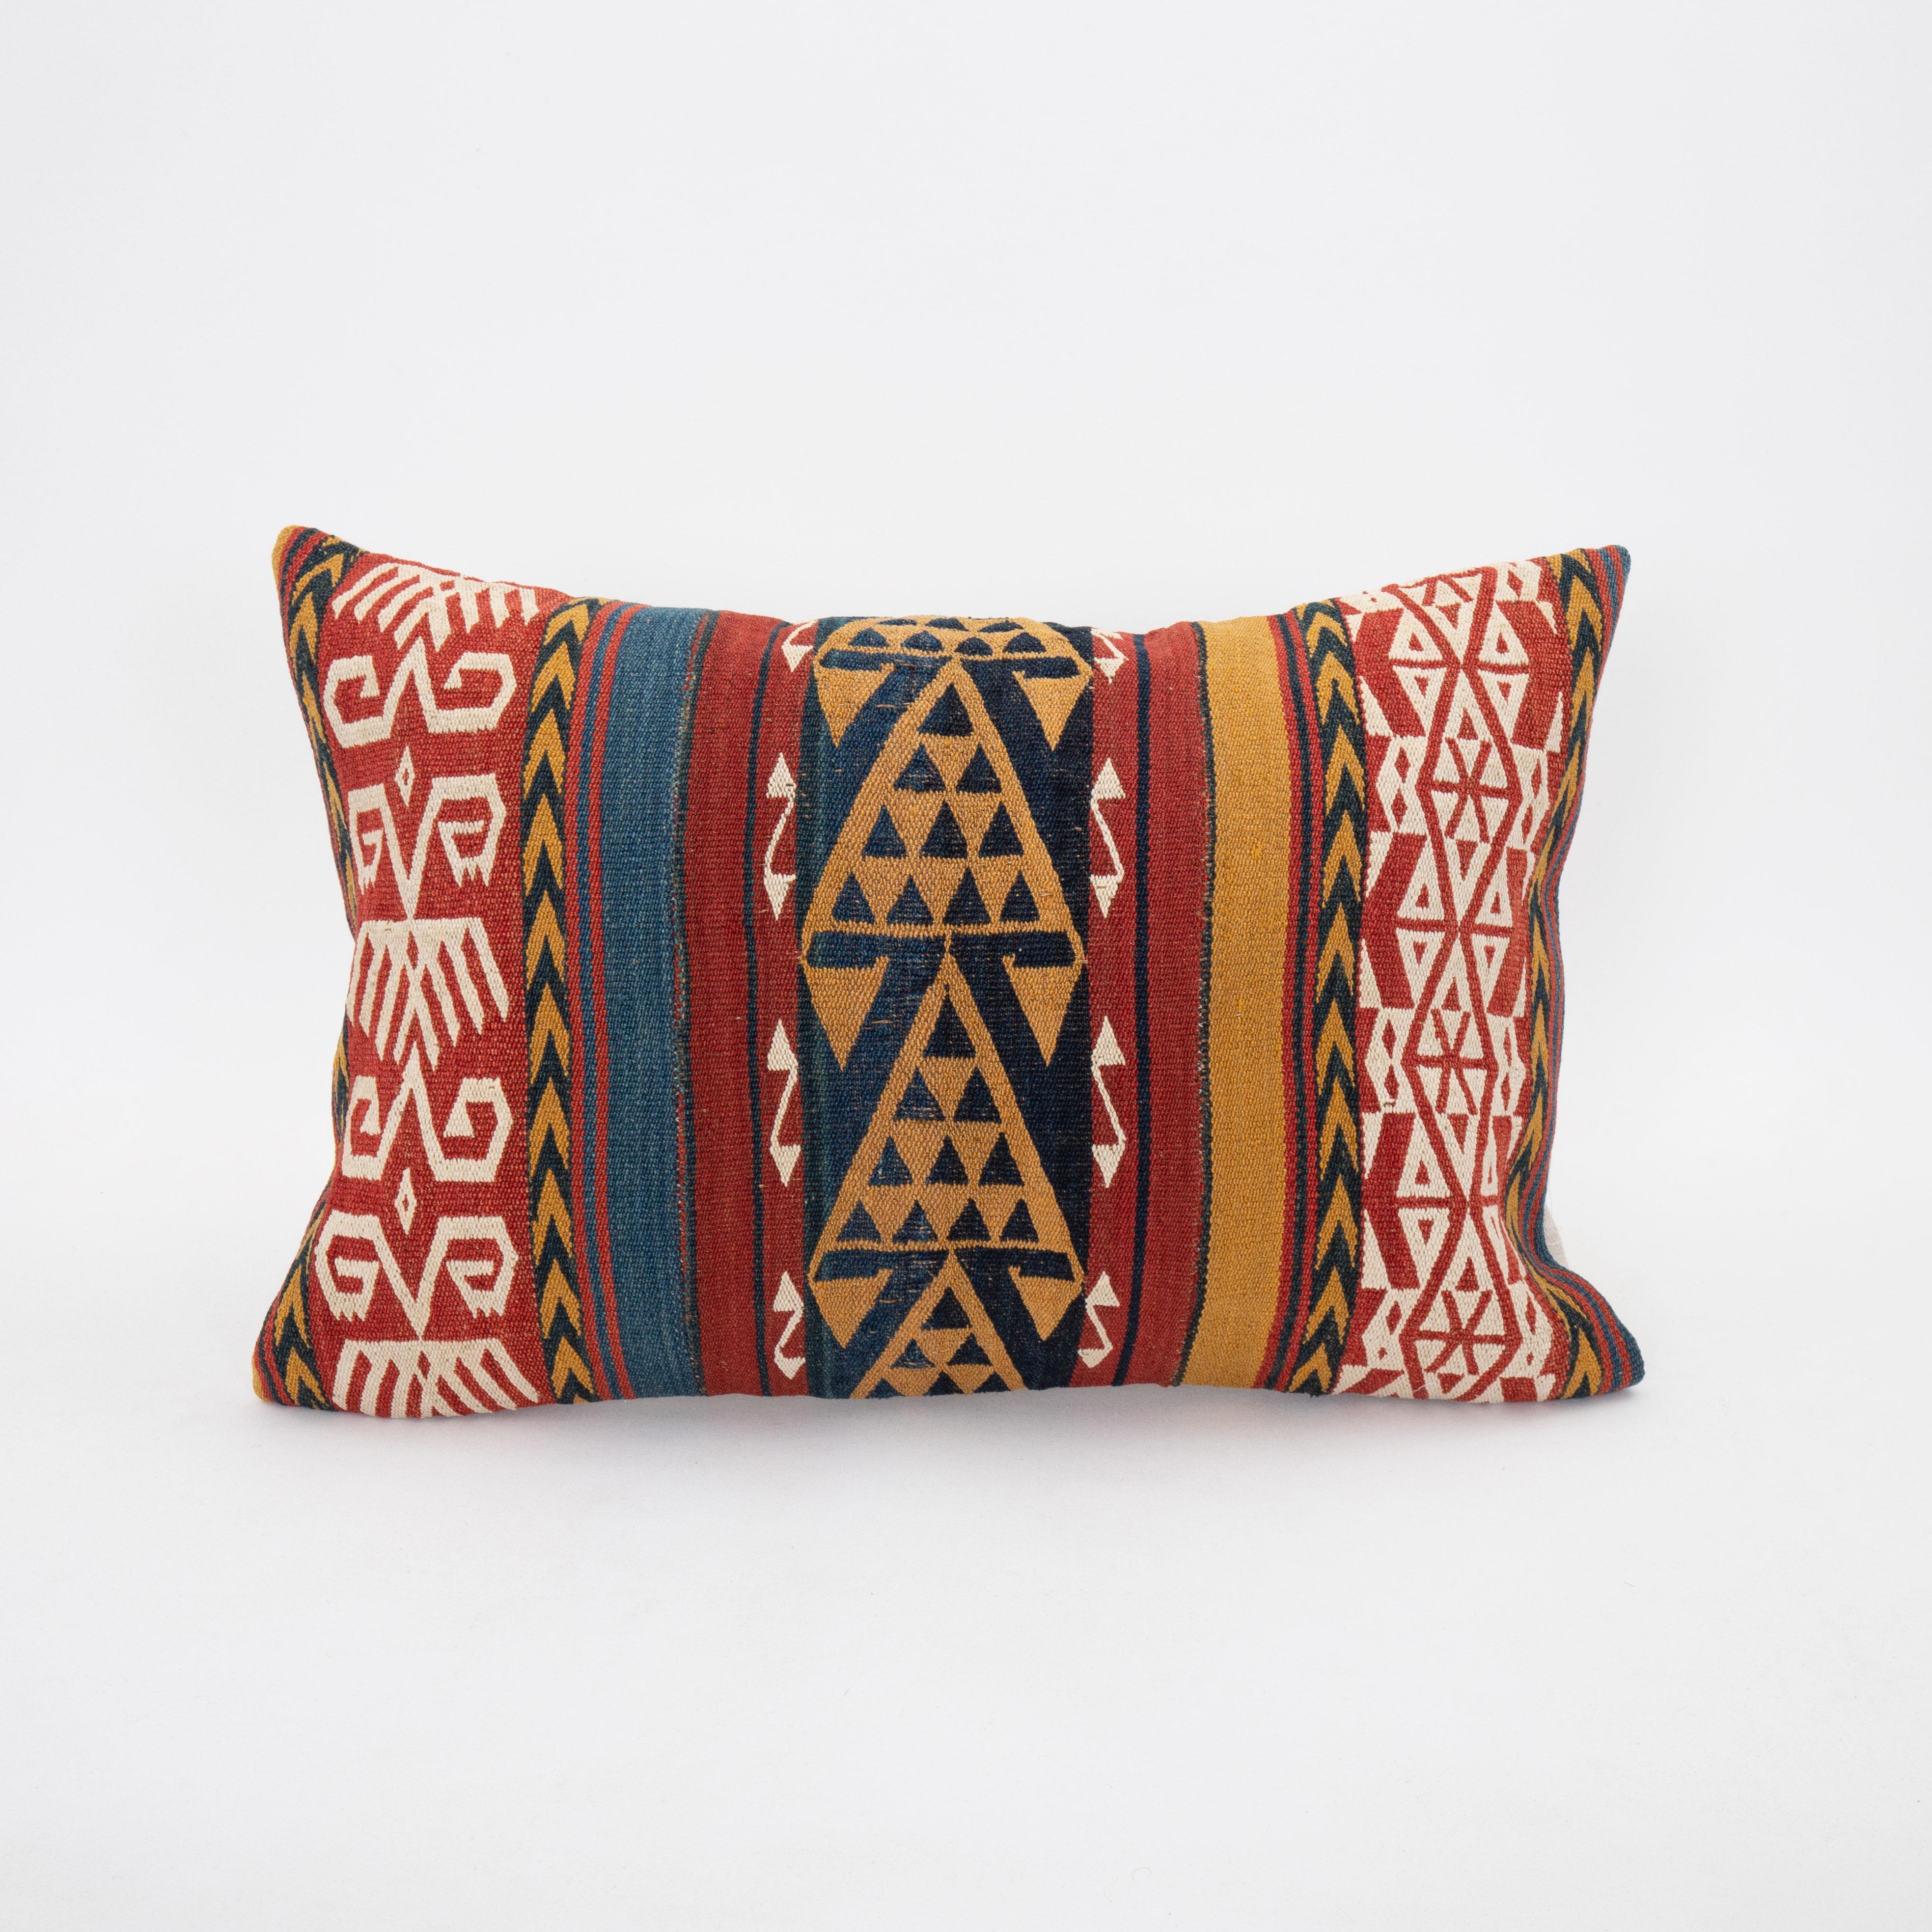 This pillowcase was made from a Central Asian , Uzbek Gudjeri ( jajim ) kilim, late 19th C.
It does not come with an insert. 
Zipper closure.
Der clean recommended.
